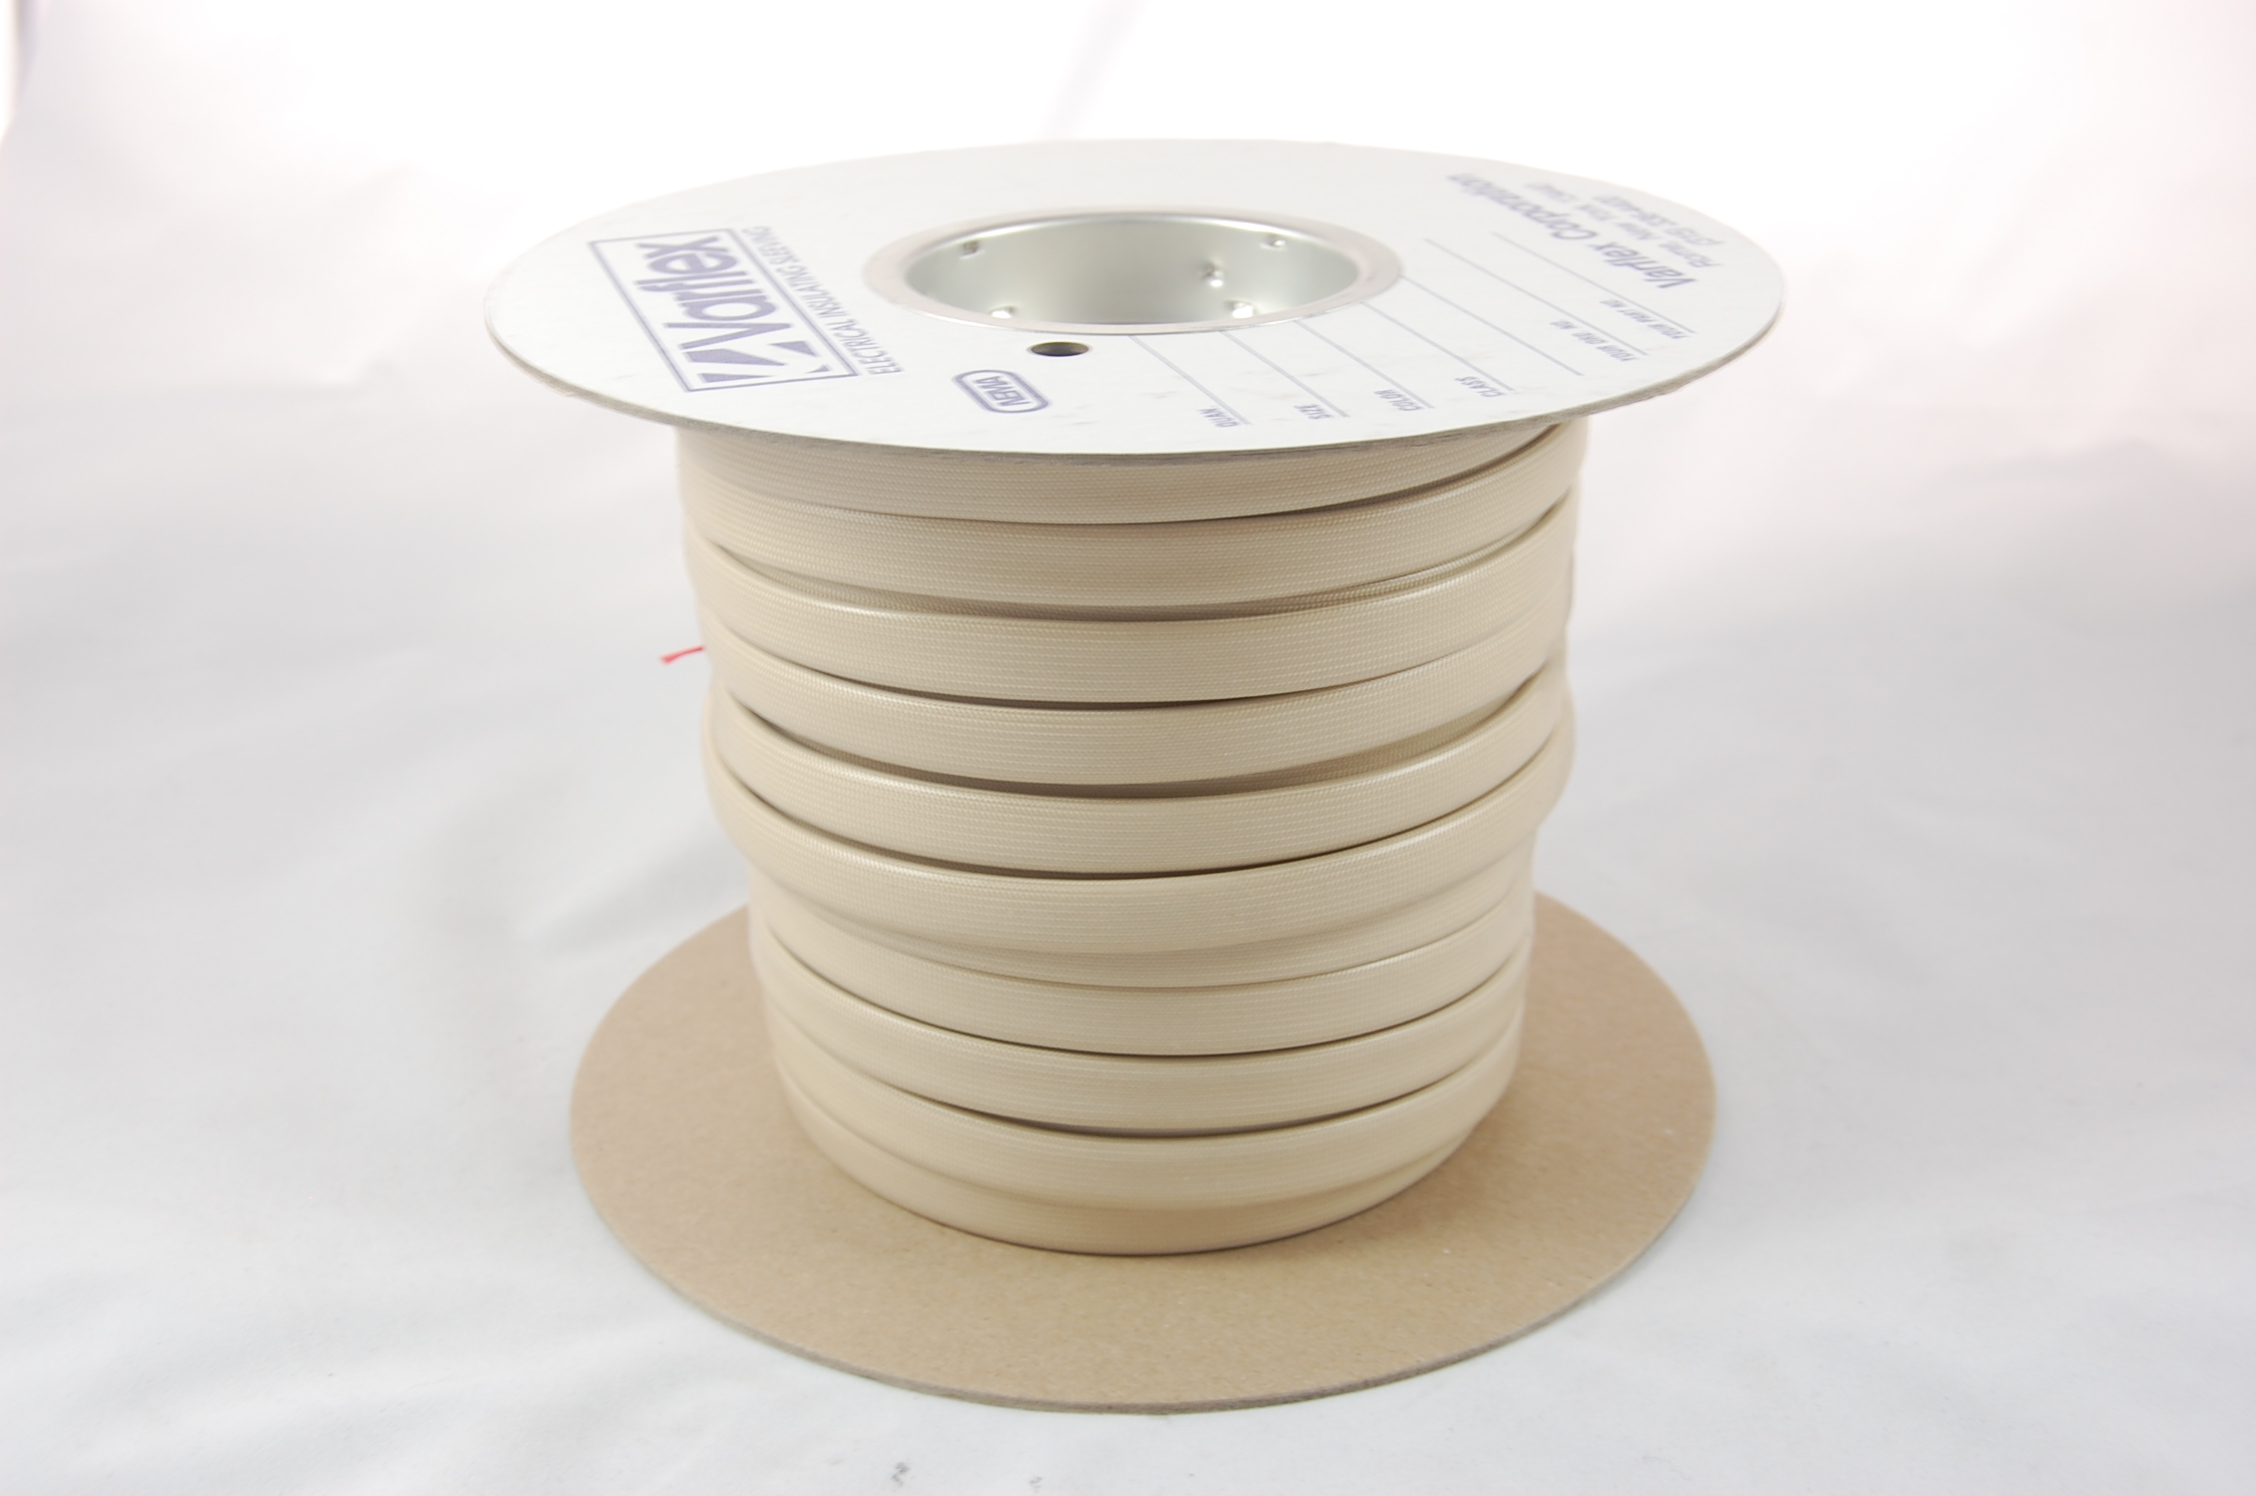 #8 AWG Varglas Silicone Rubber Grade H-C-1 (2500V) High Temperature Silicone Rubber Coated Braided Fiberglass Sleeving 200°C, natural, 150 FT per spool